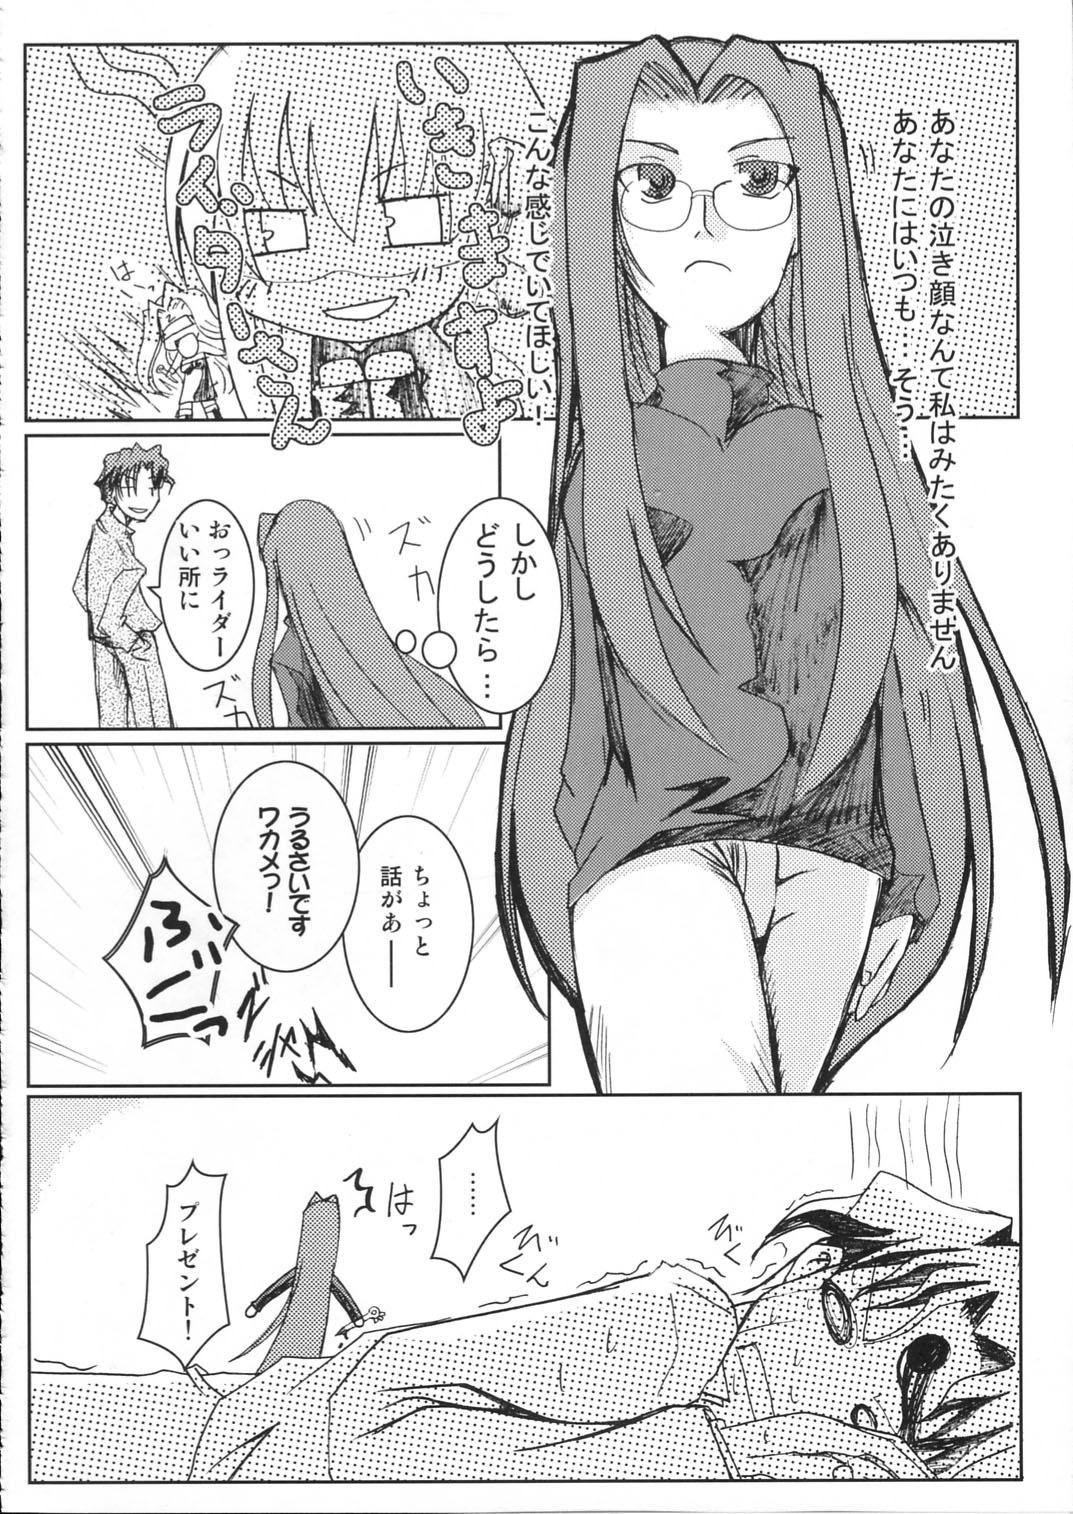 Boobies JUDGEMENT - Fate stay night Fate hollow ataraxia Lips - Page 10